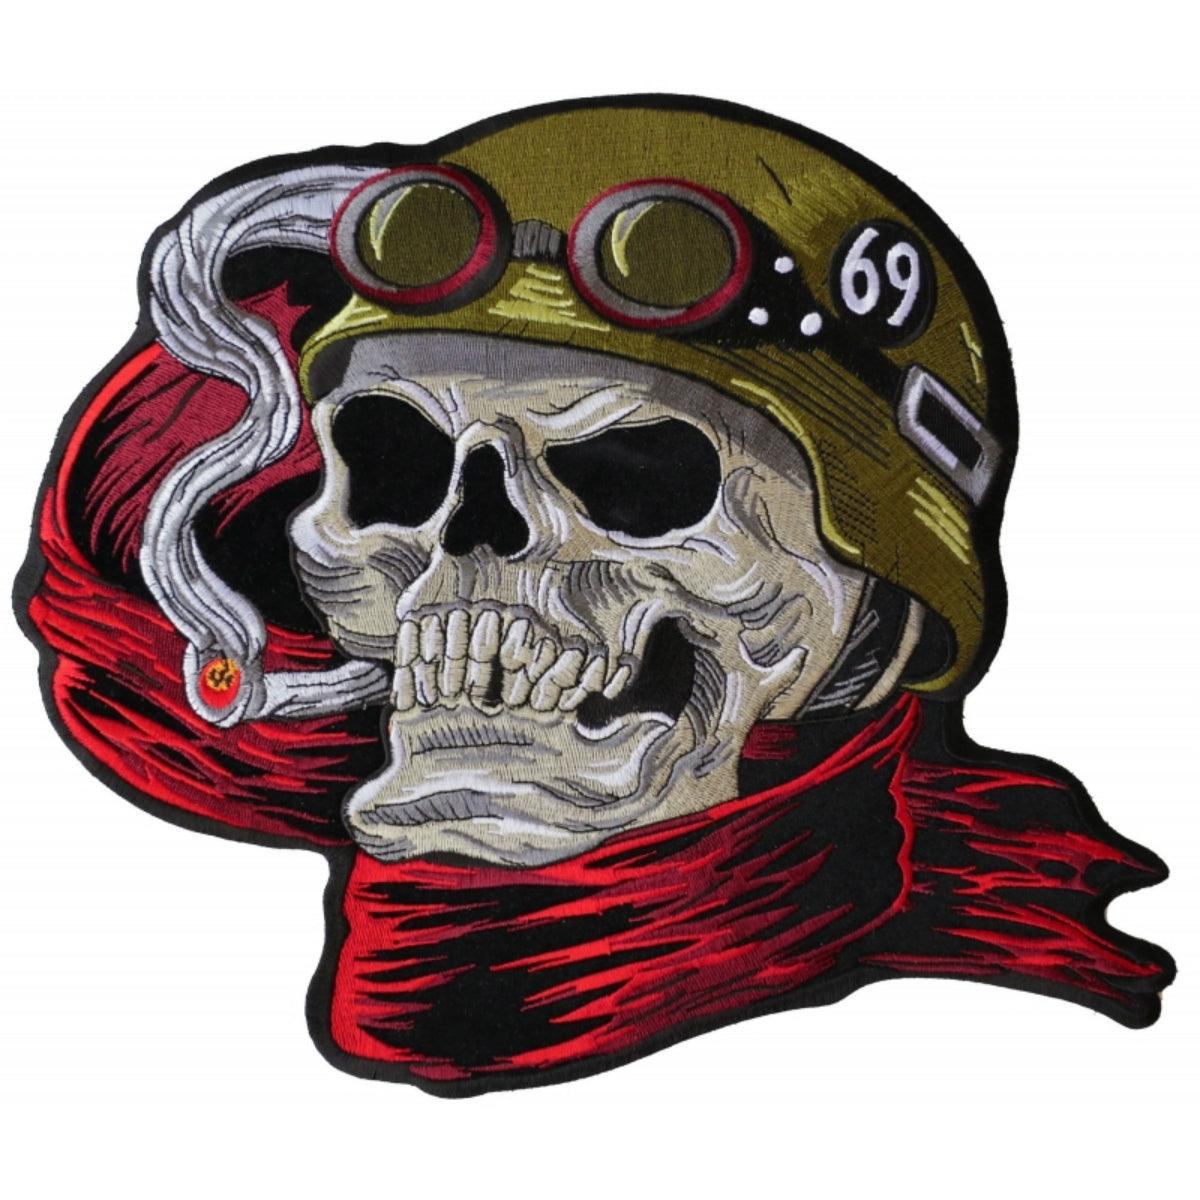 Daniel Smart Biker Skull Embroidered Iron on Patch, 11.4 x 10 inches - American Legend Rider